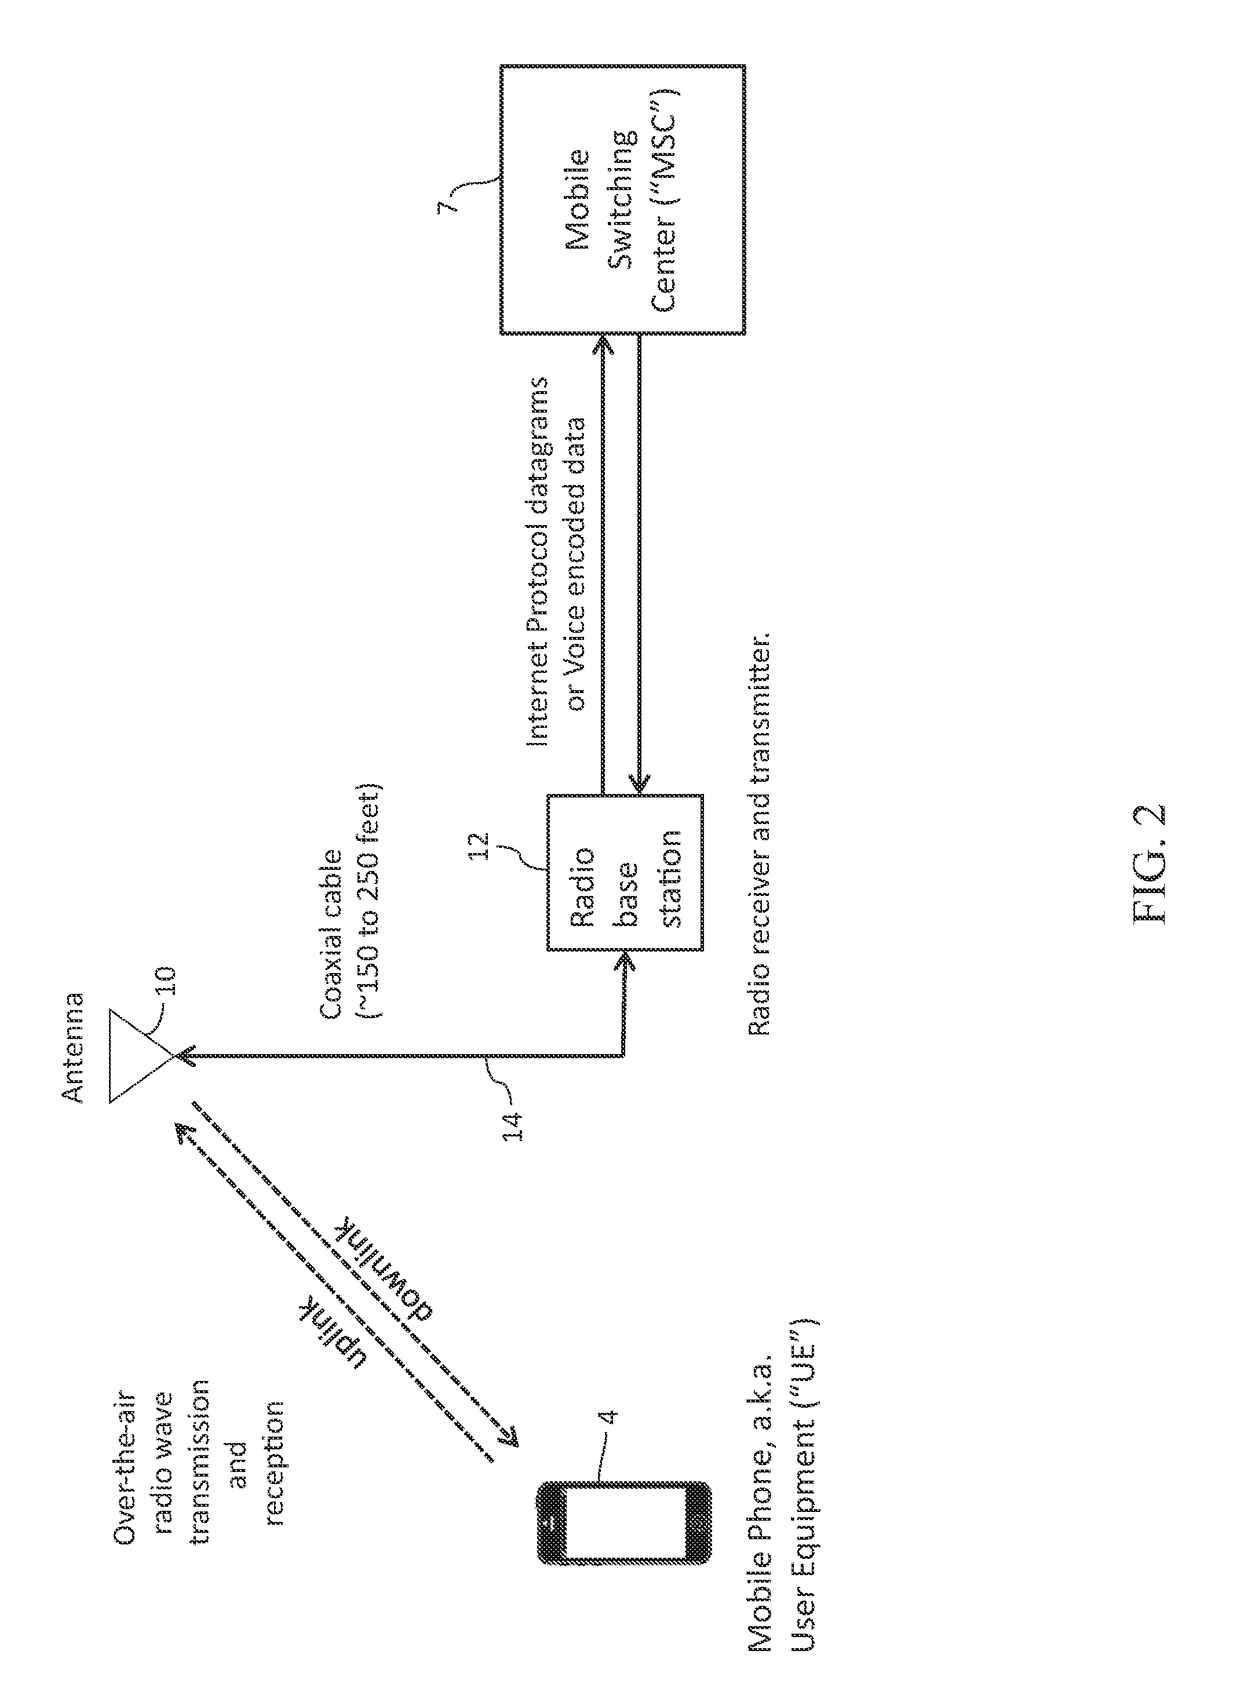 Method and apparatus for the detection of distortion or corruption of cellular communication signals